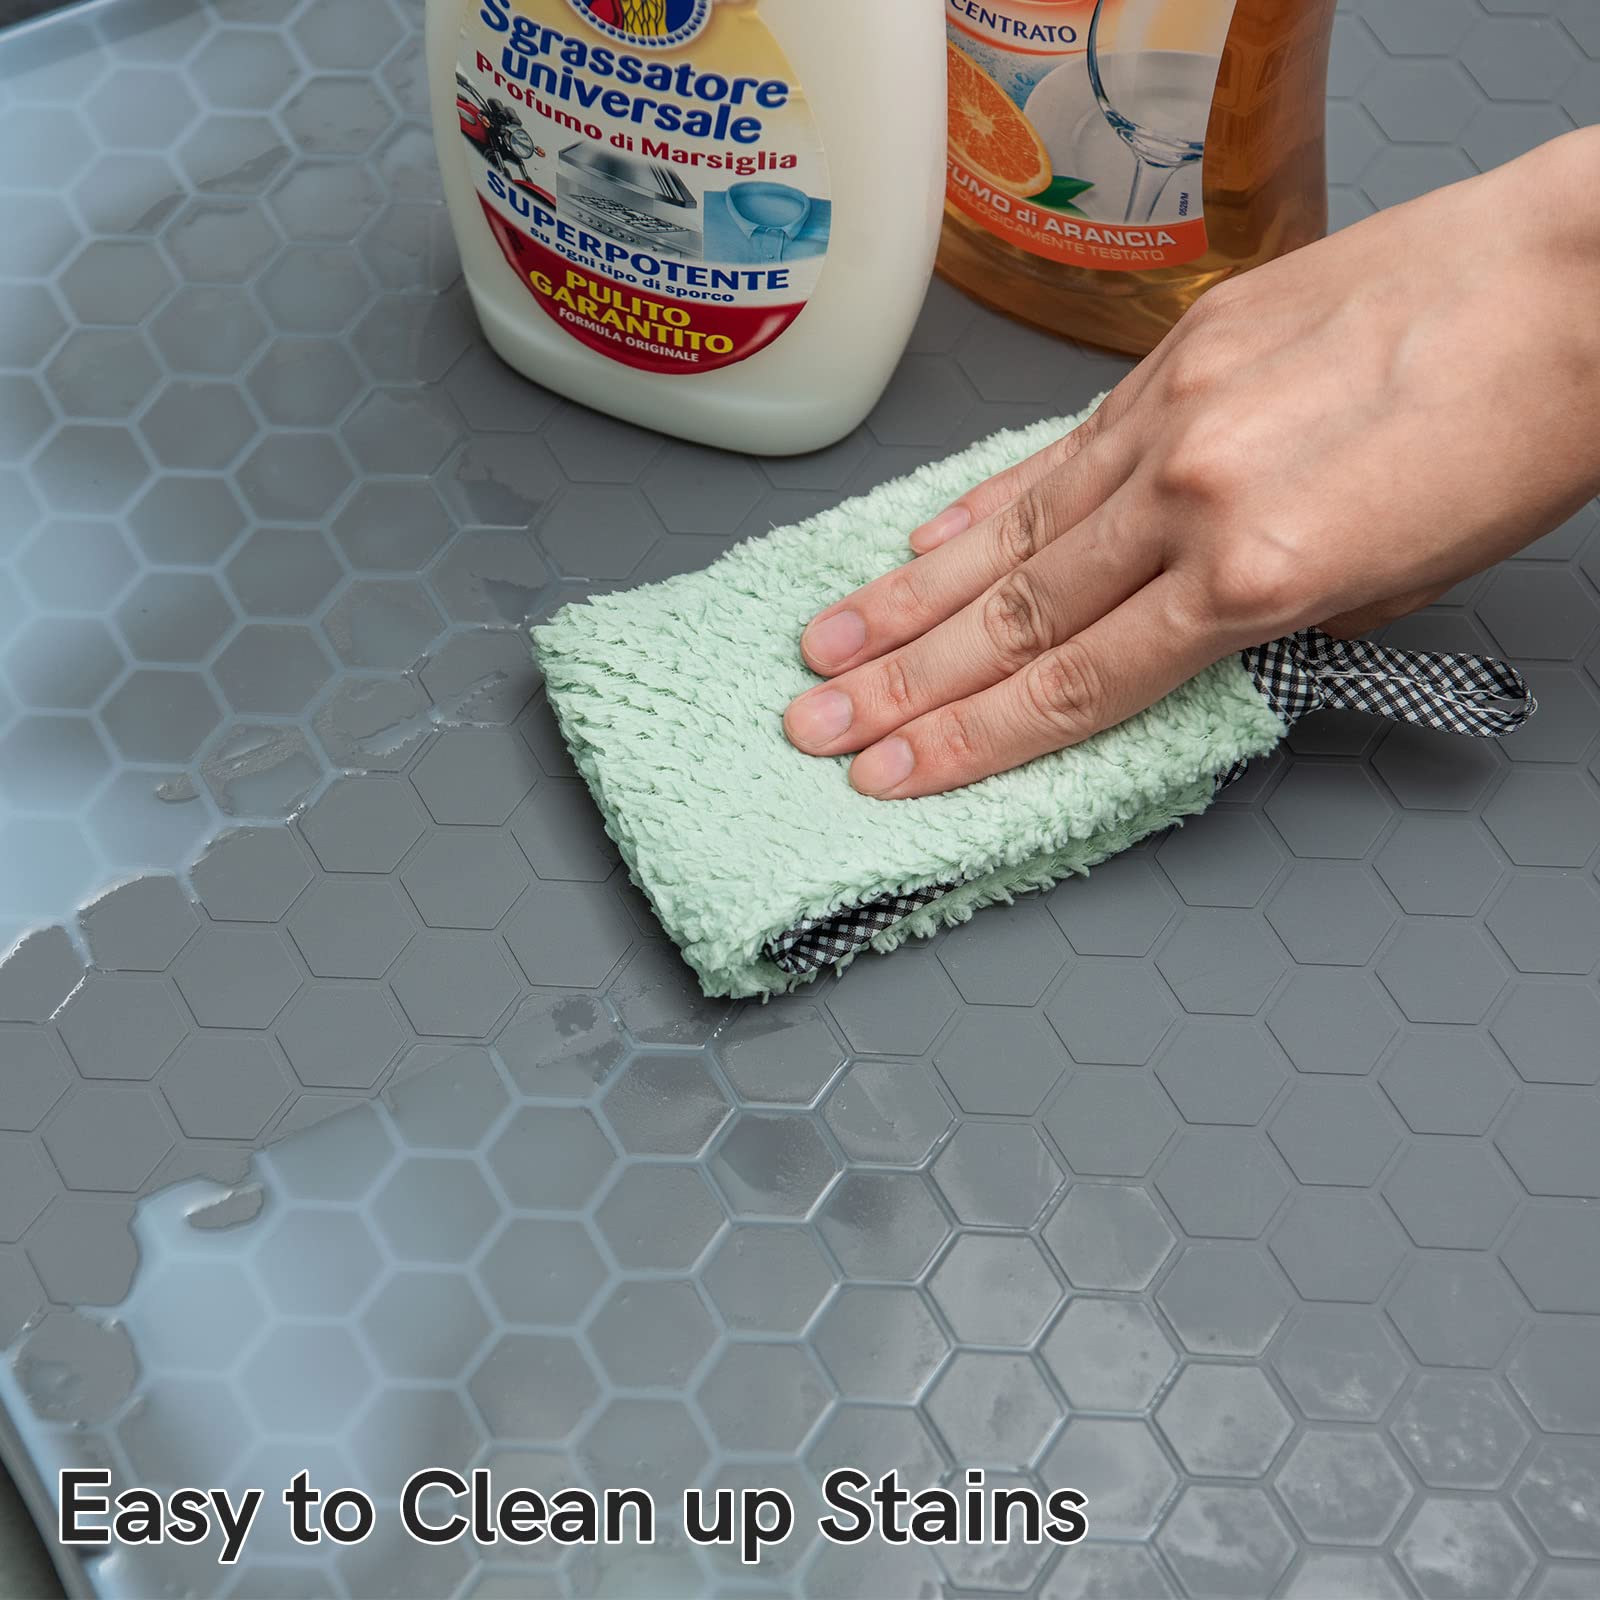 Under Sink Mat Waterproof, Under Sink Liner with Drain Hole, Kitchen Bathroom Silicone Cabinet Liner Hold up to 3.3 Gallons Liquid (Grey), Gray, 34 inches * 22 inches * 1 inches